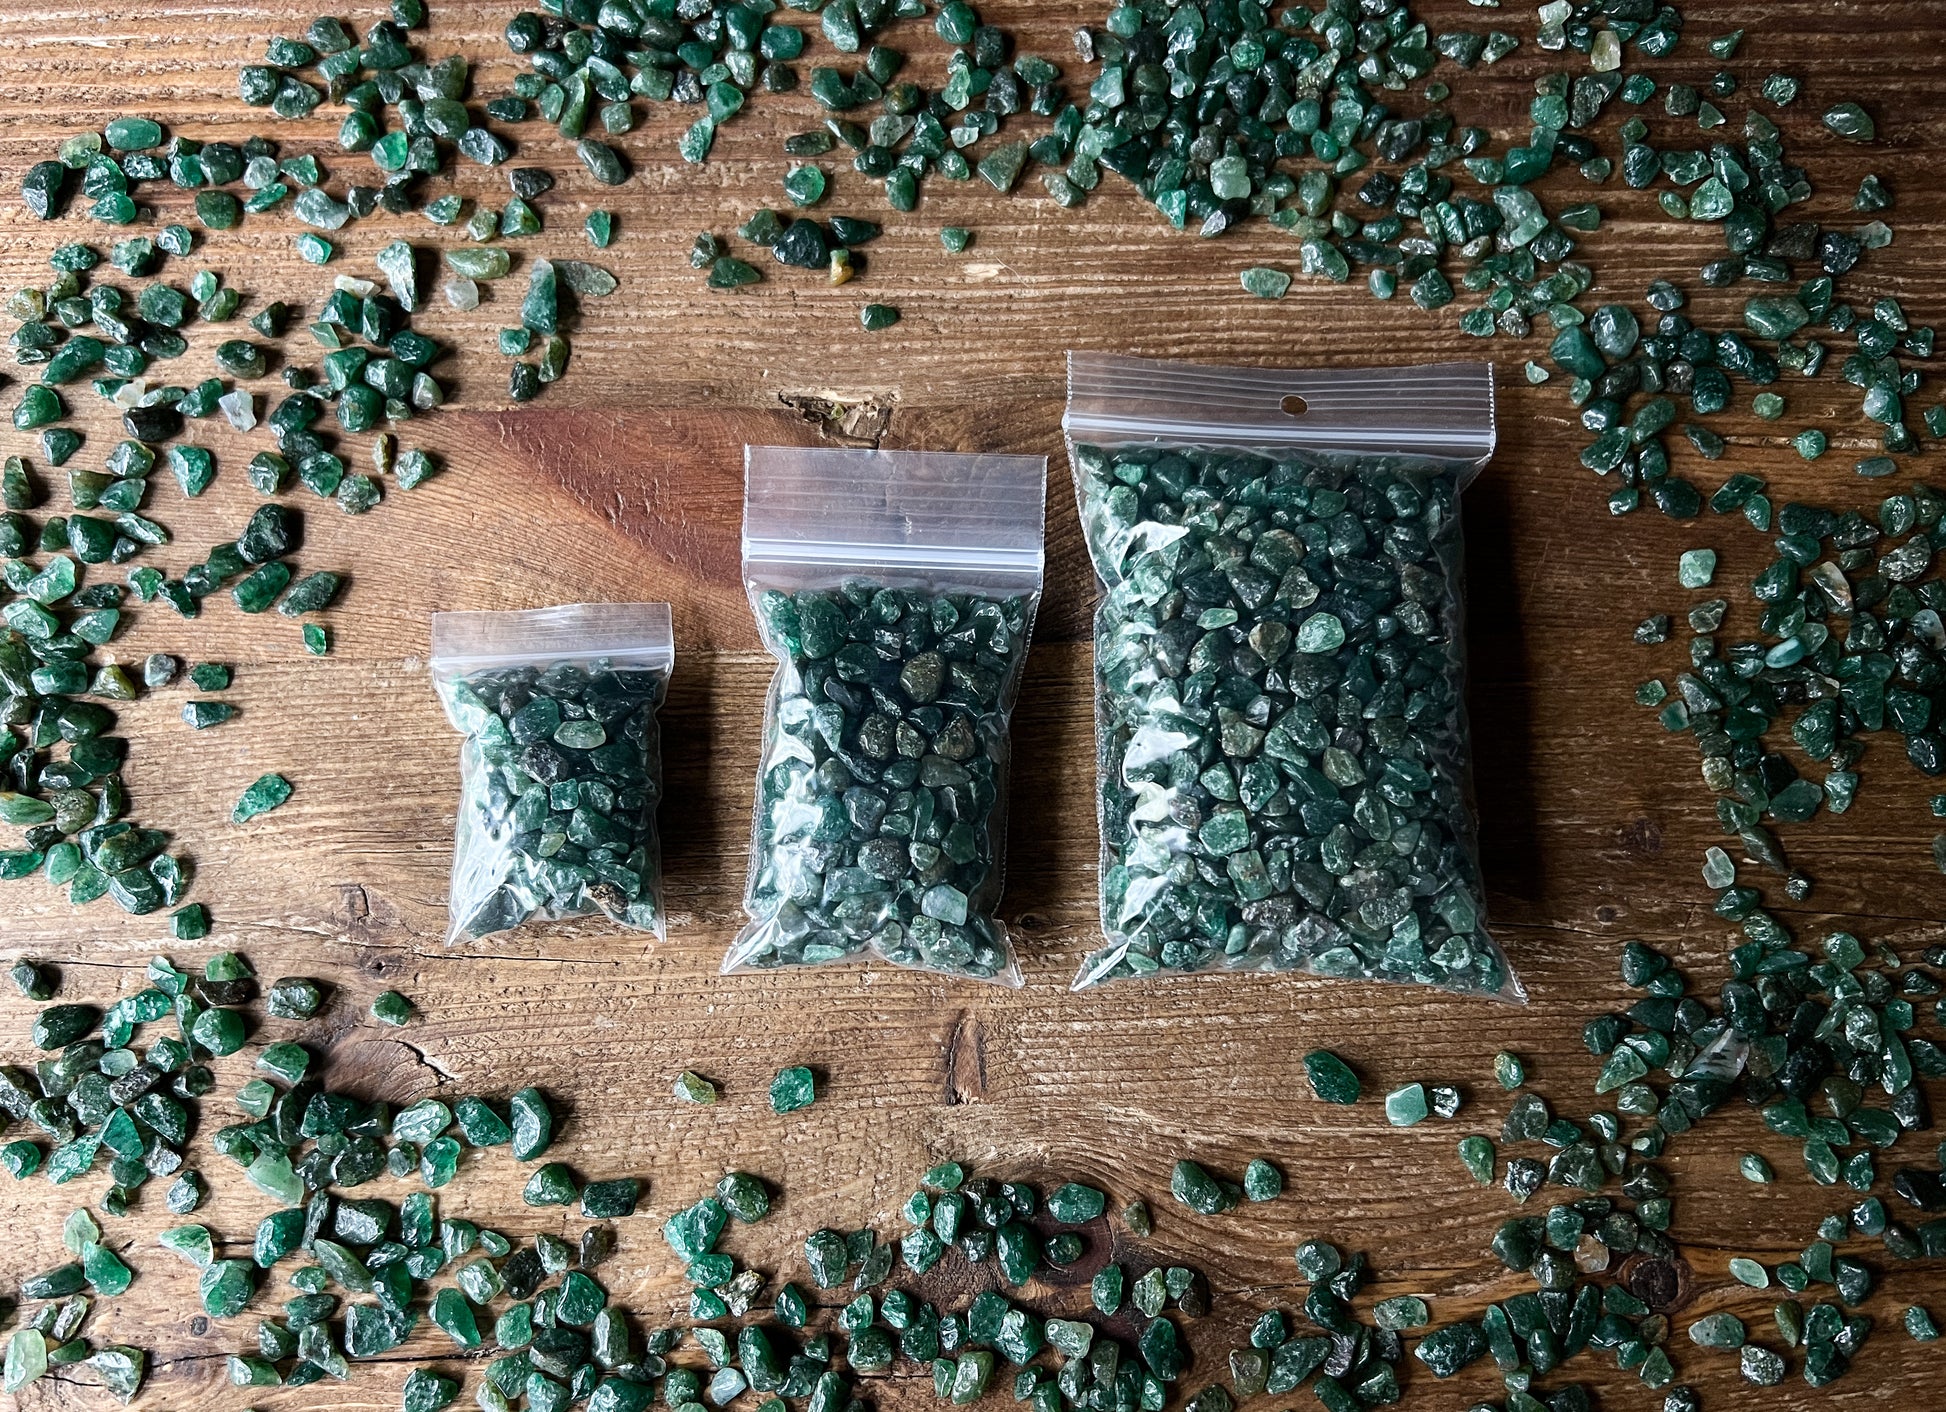 These Emerald Crystal Chips are sold by the gram at The Stone Maidens.